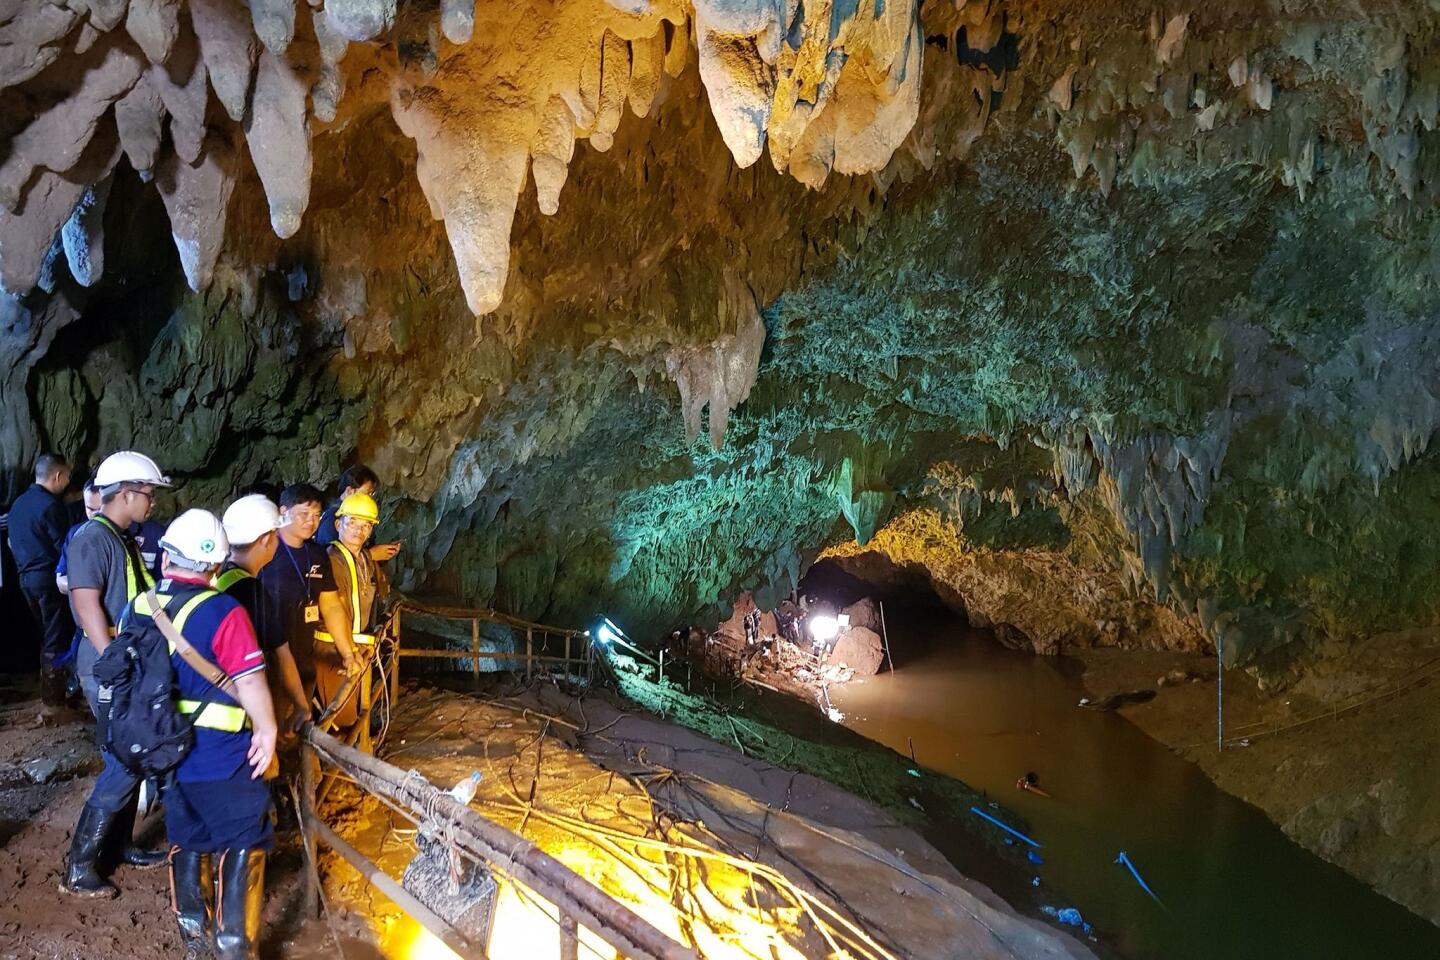 Thai workers attempt to drain the water from the cave during the search and rescue operation.